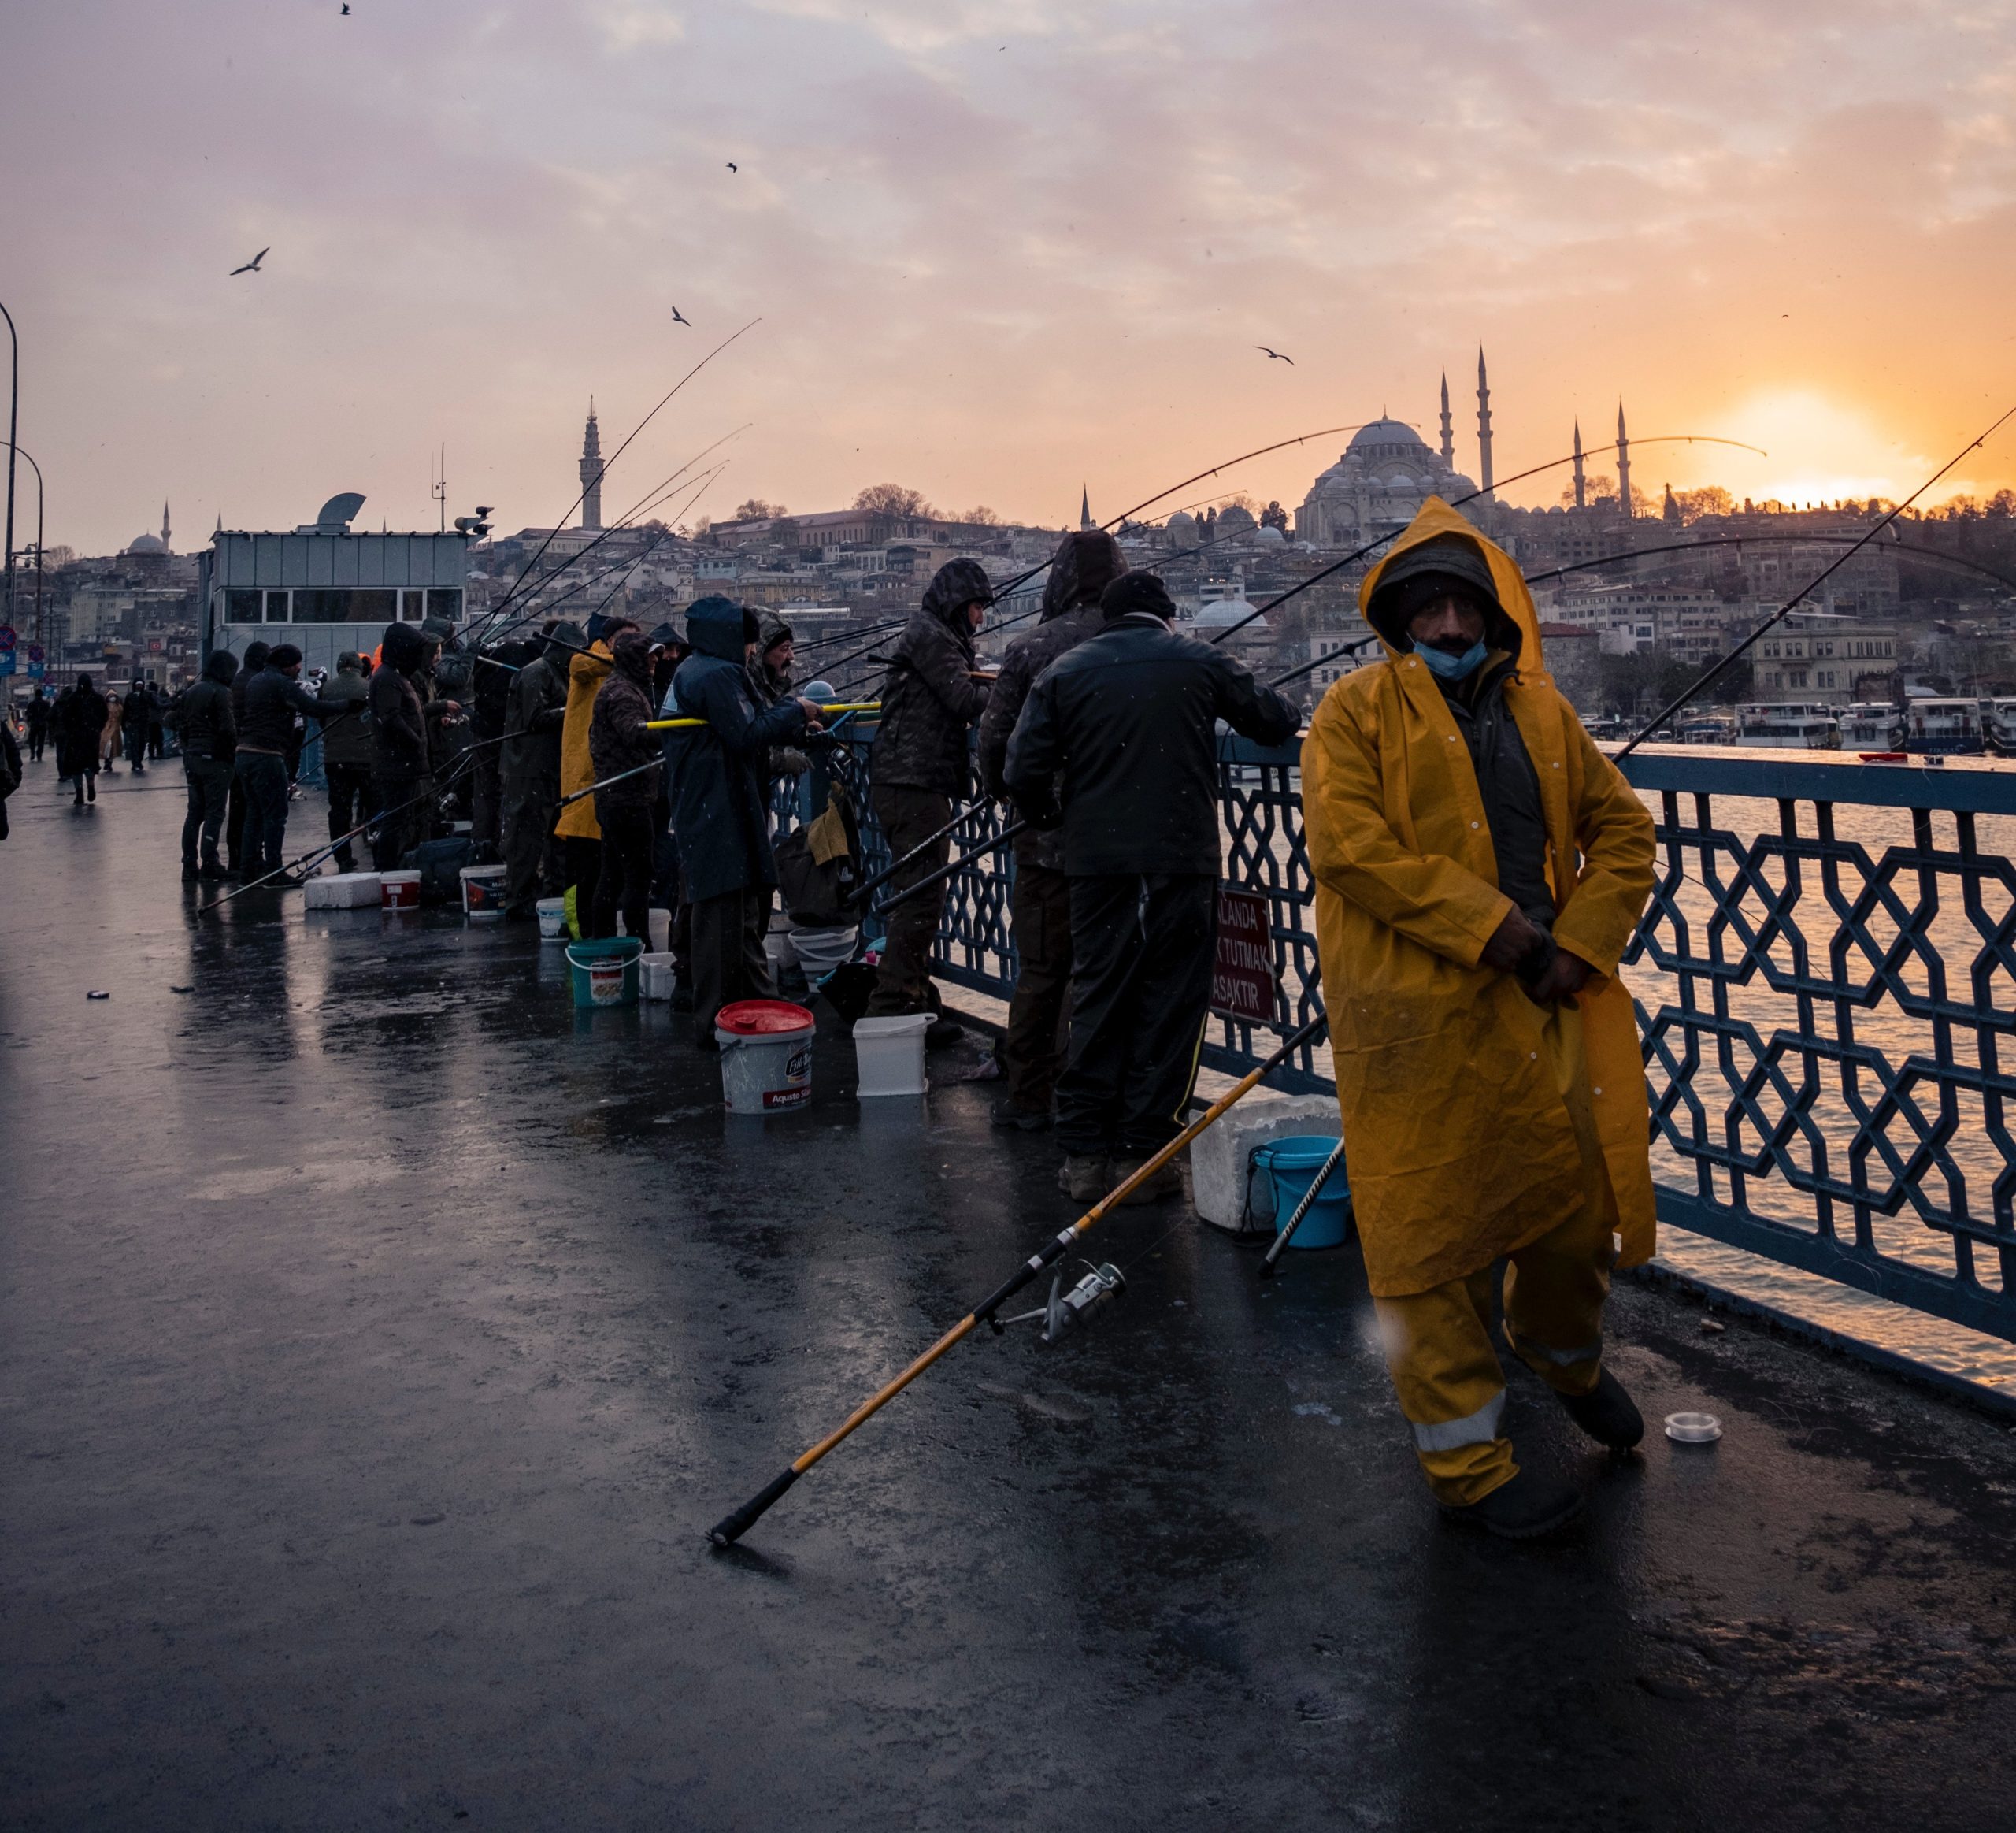 Istanbul Fishing Enthusiasts: A Guide to Angling in the City